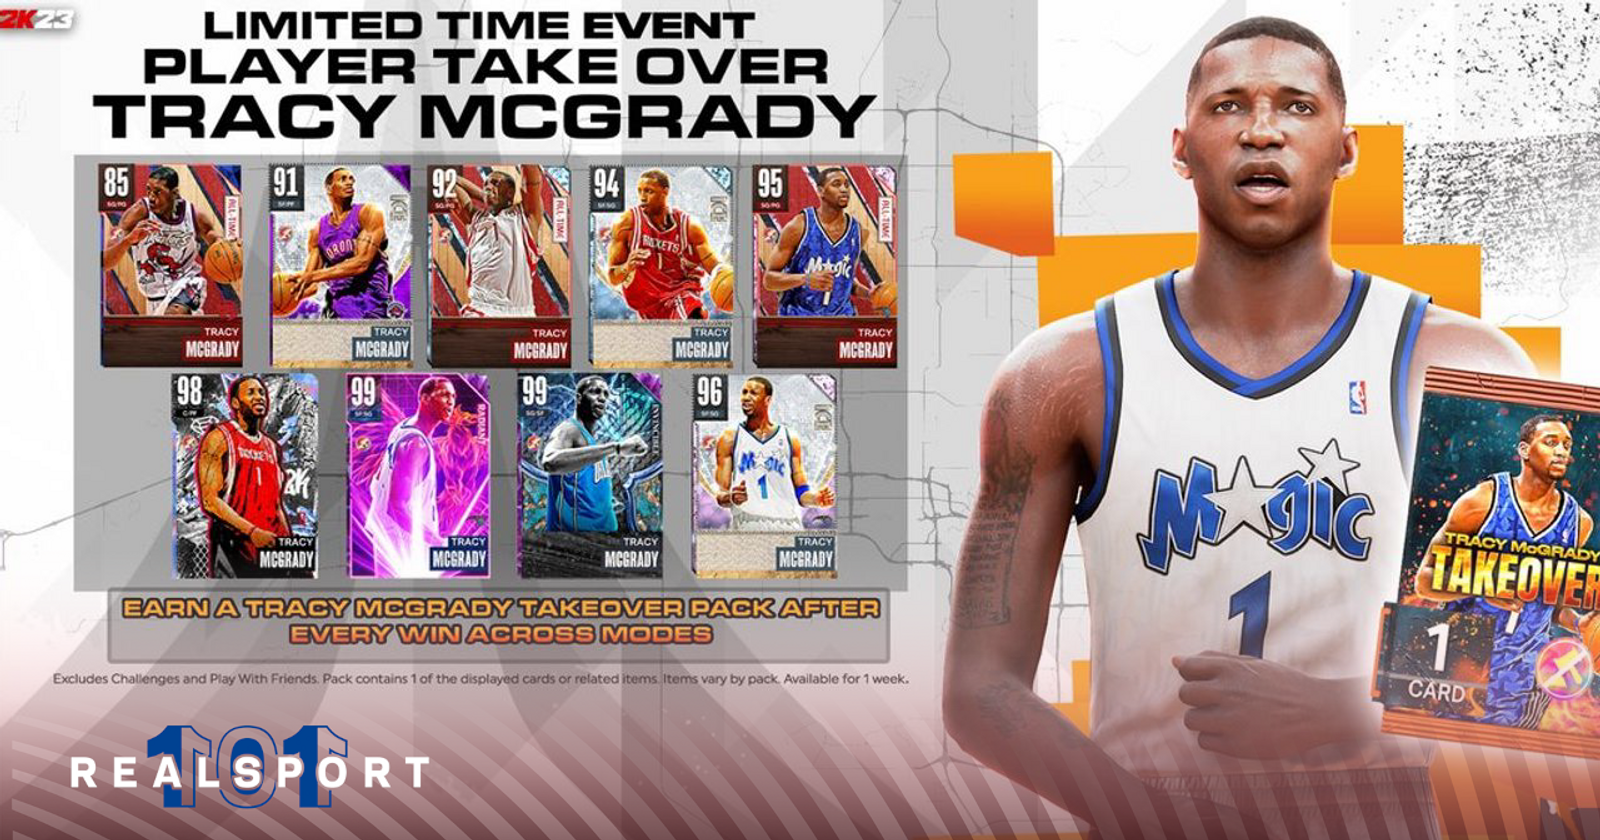 Tracy McGrady through the years